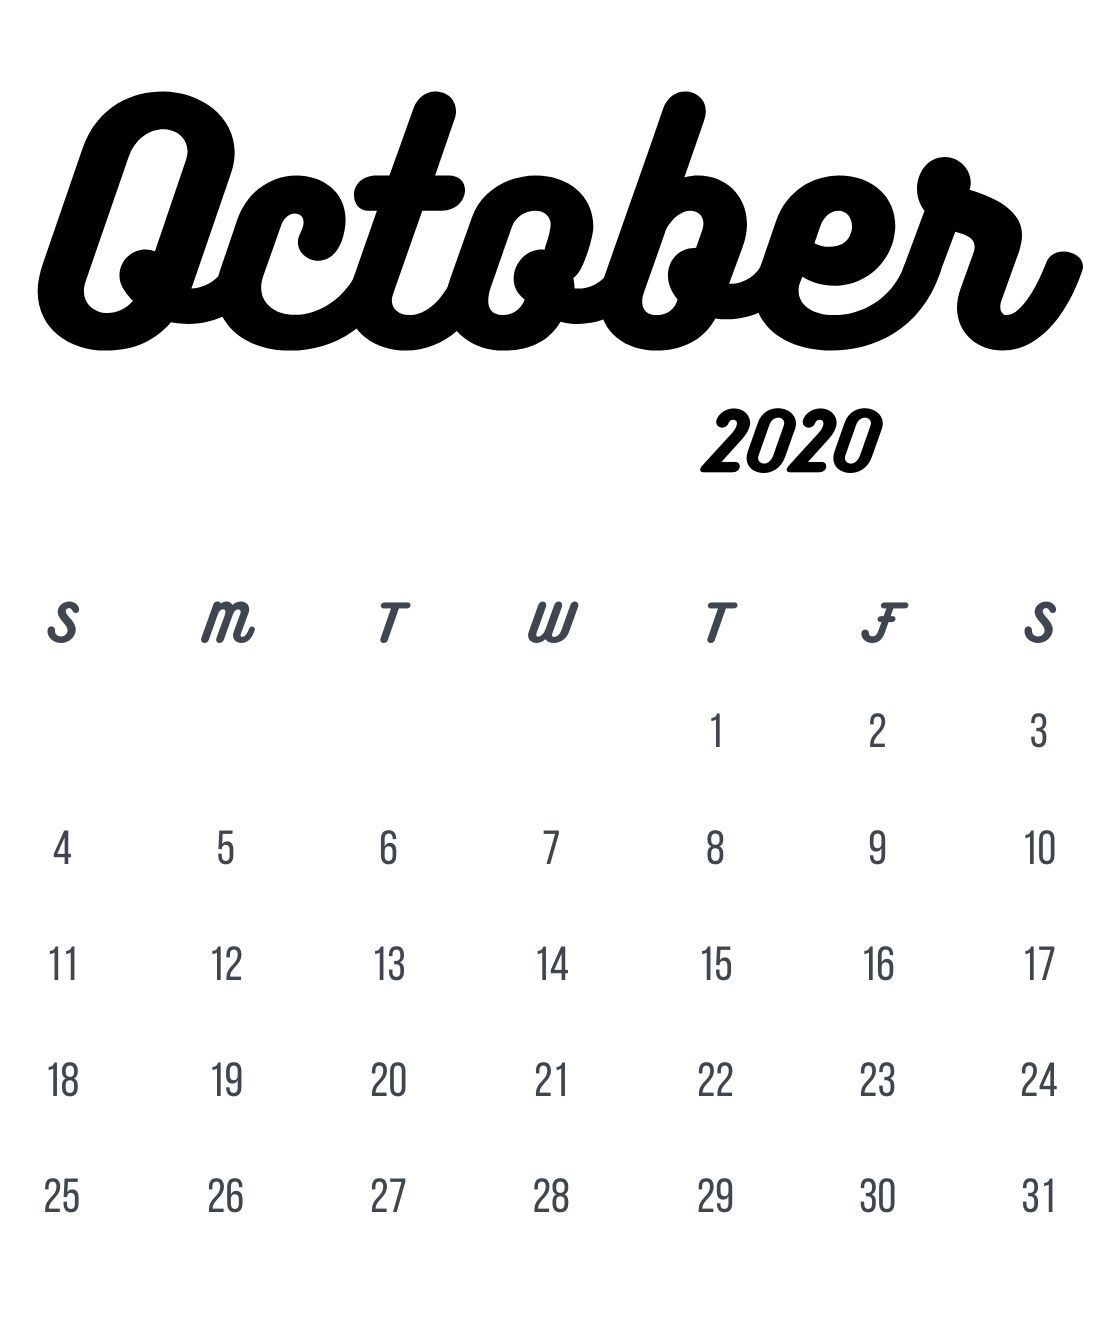 October 2020 Calligraphy Calendar Free Download within Printable Month Calligraphy Clander